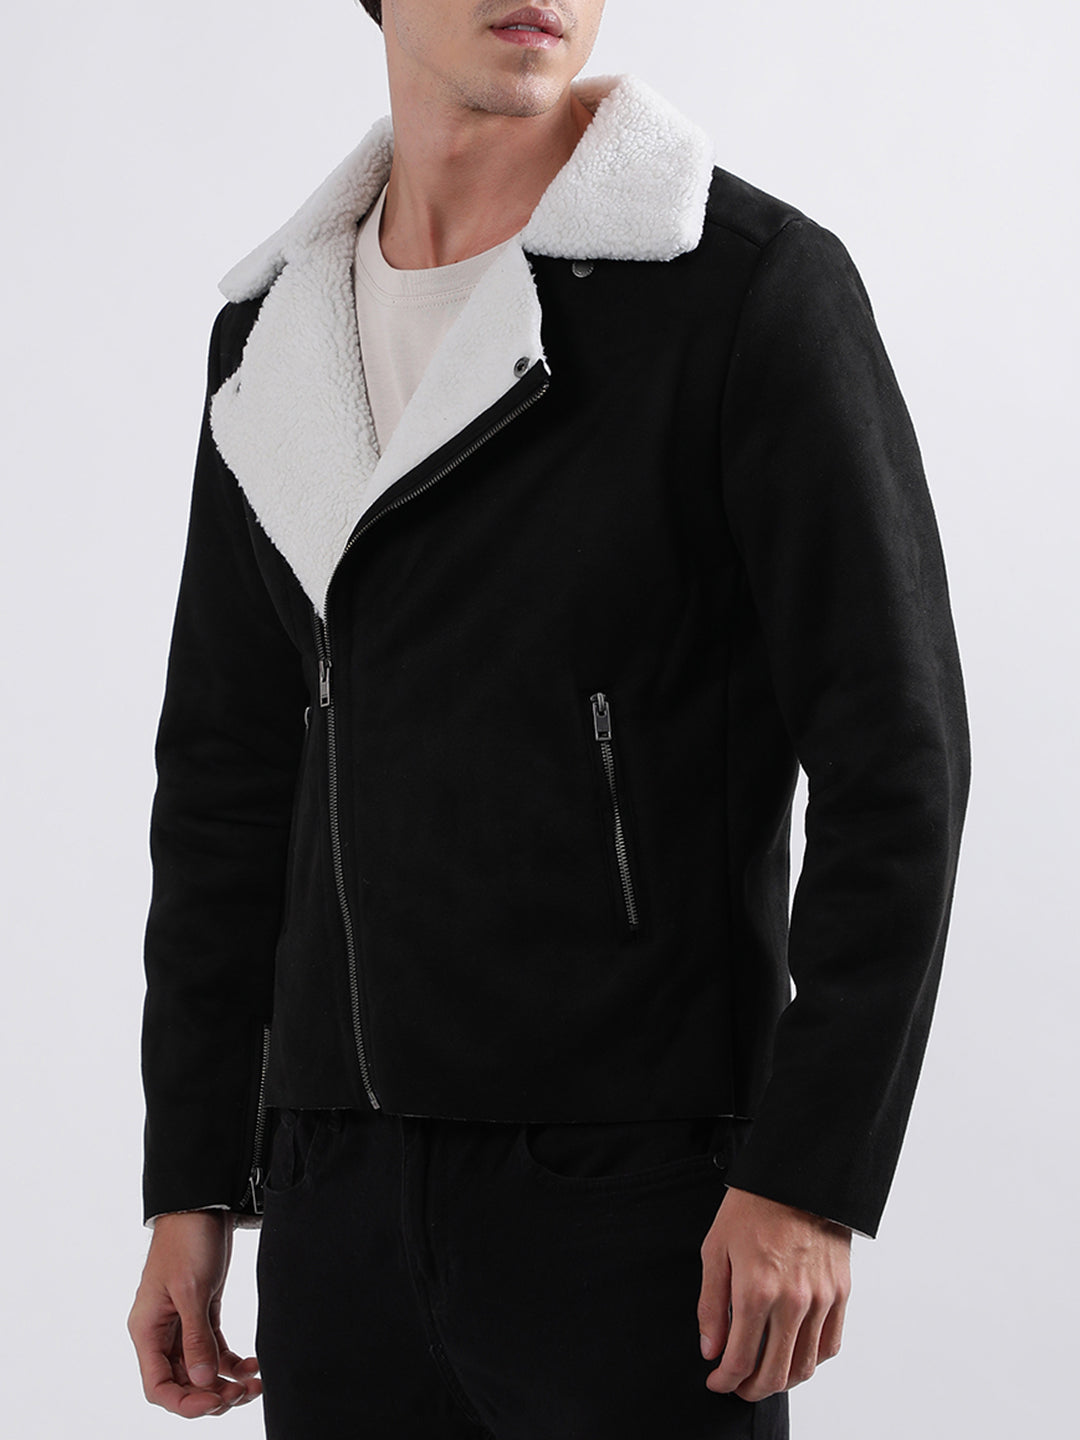 Black Faux Shearling Jacket  Shop The Latest Styles - LINDBERGH